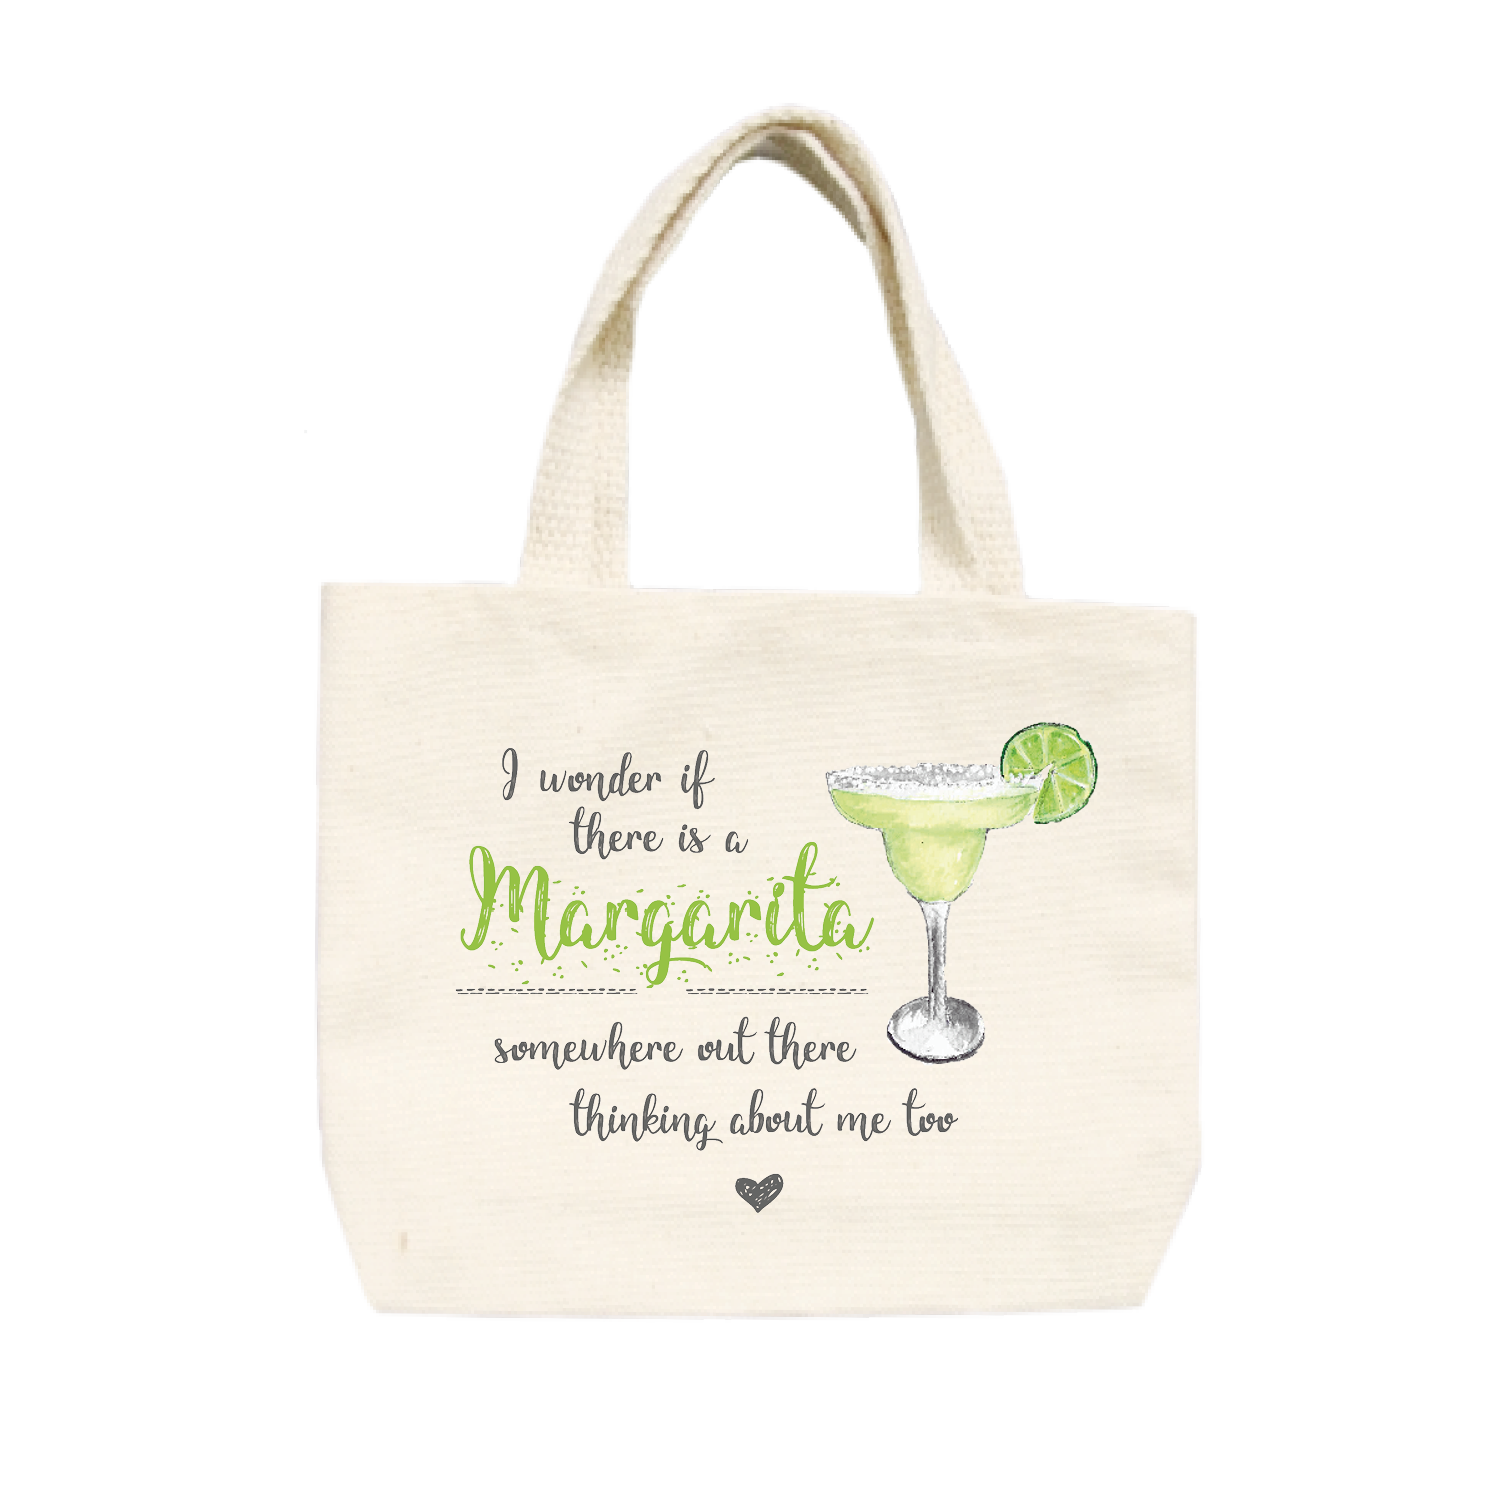 margarita thinking about me too small tote